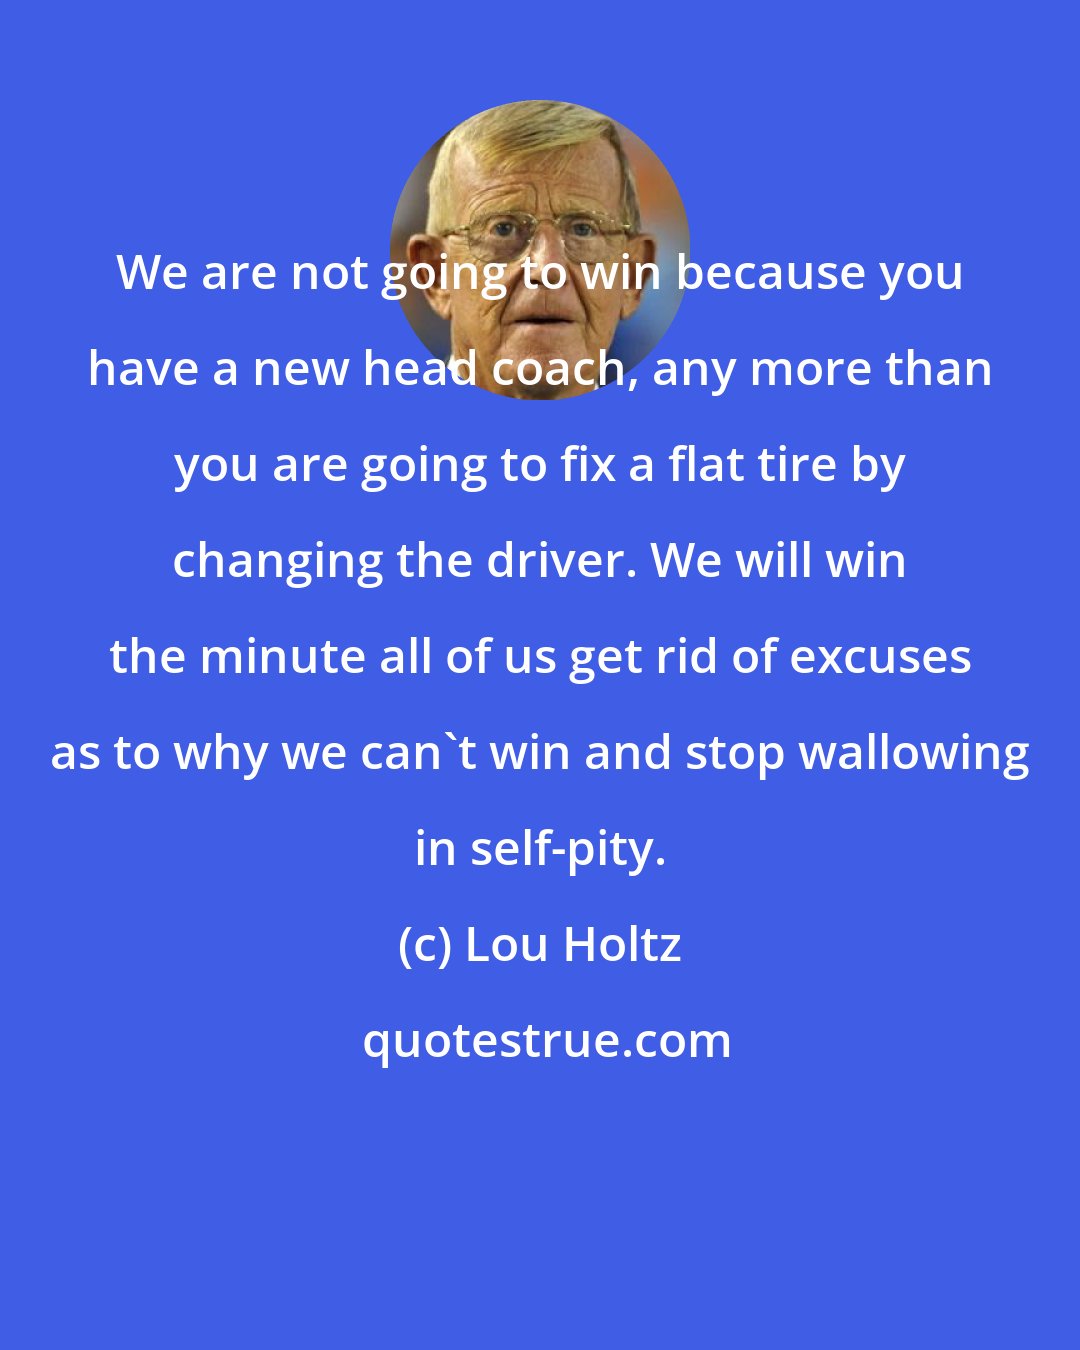 Lou Holtz: We are not going to win because you have a new head coach, any more than you are going to fix a flat tire by changing the driver. We will win the minute all of us get rid of excuses as to why we can't win and stop wallowing in self-pity.